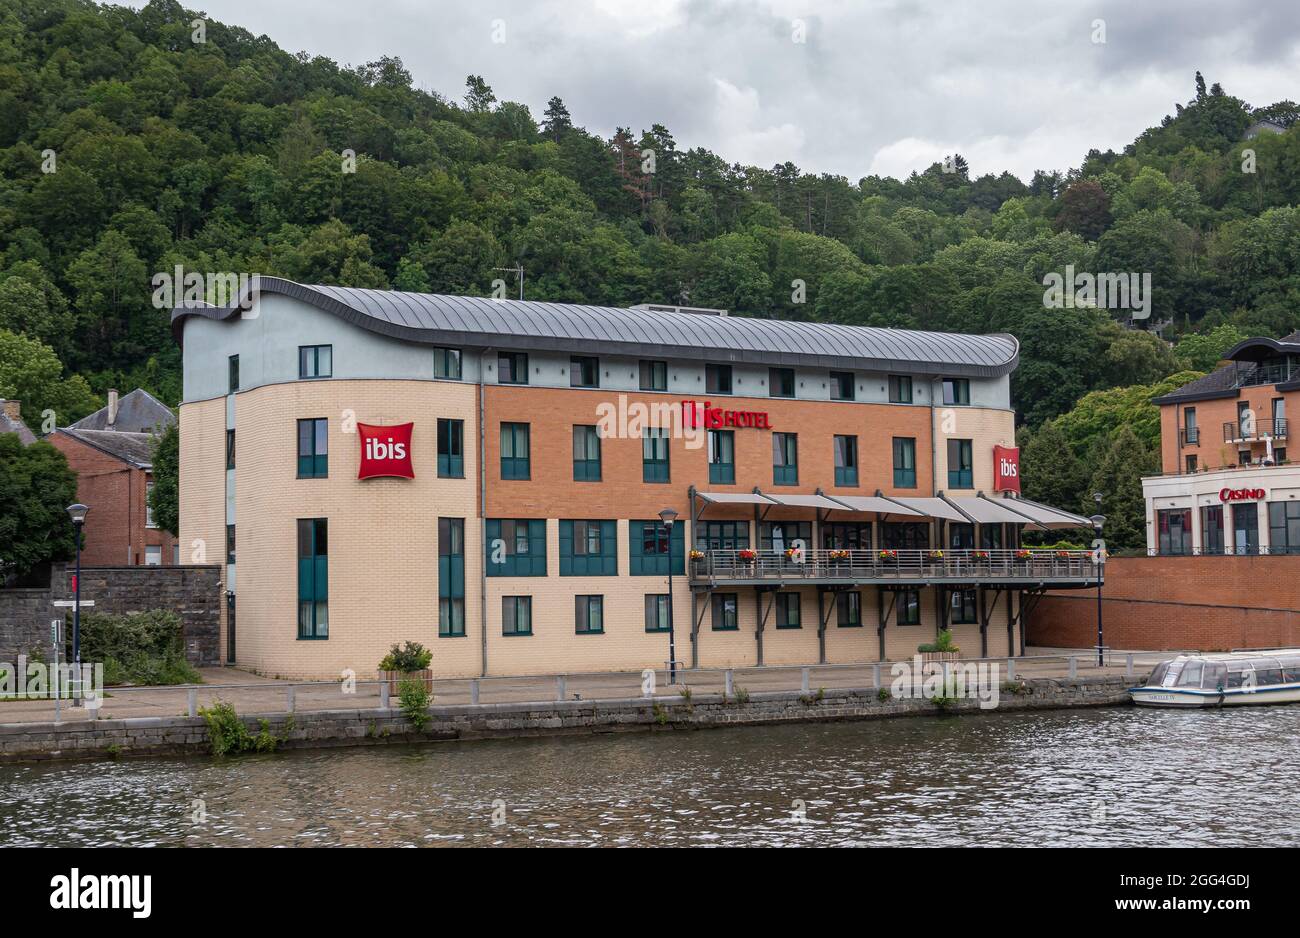 Dinant, Wallonia, Belgium - August 8, 2021: Closeup of IBIS hotel advertises name in red along Meuse river with green forested hill in back under heav Stock Photo